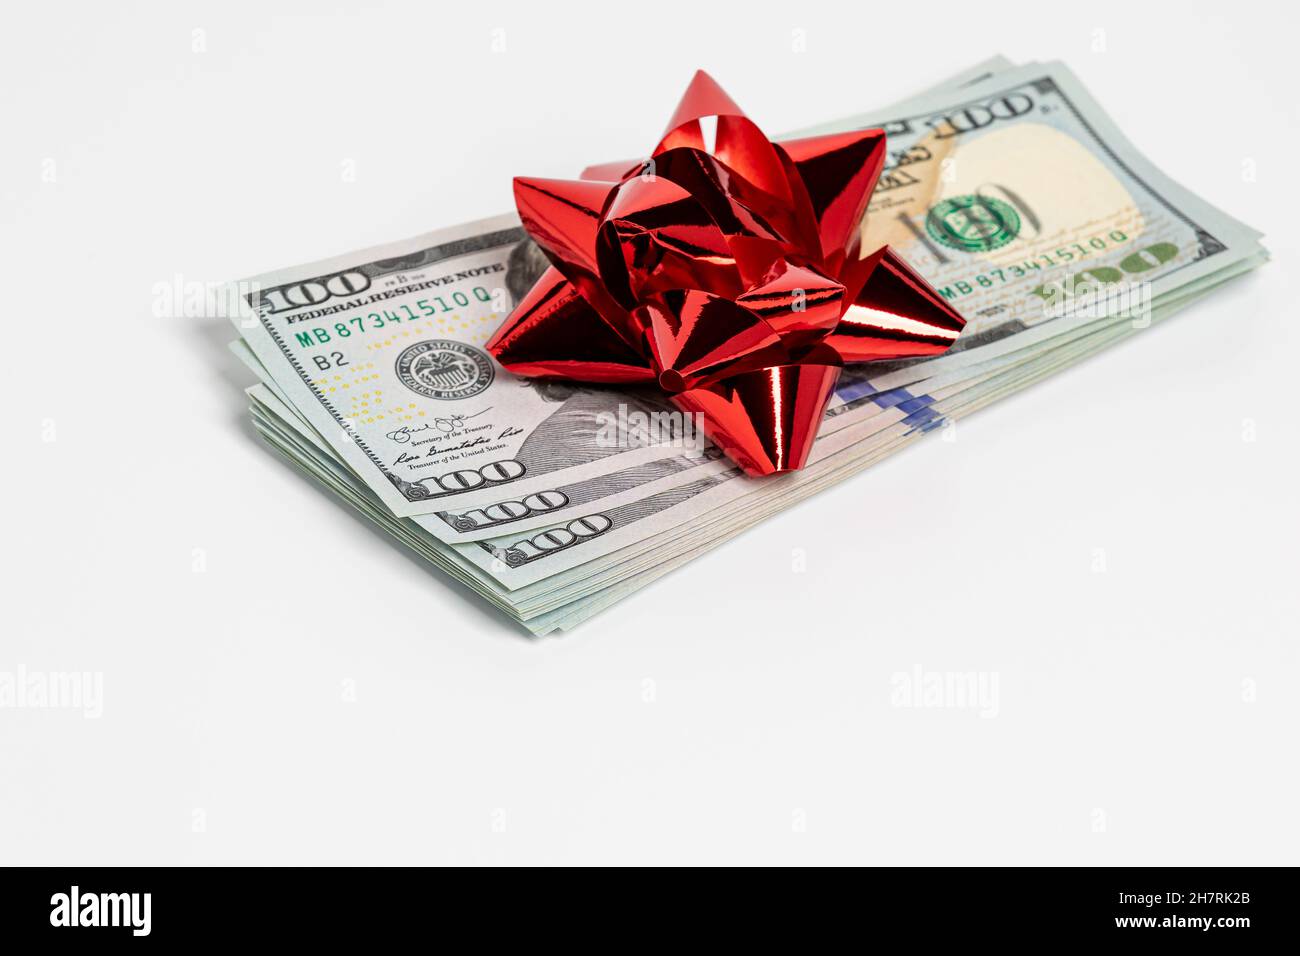 Cash gift of 100 dollar bills with red bow. Gift tax, charitable donation and holiday present concept. Stock Photo